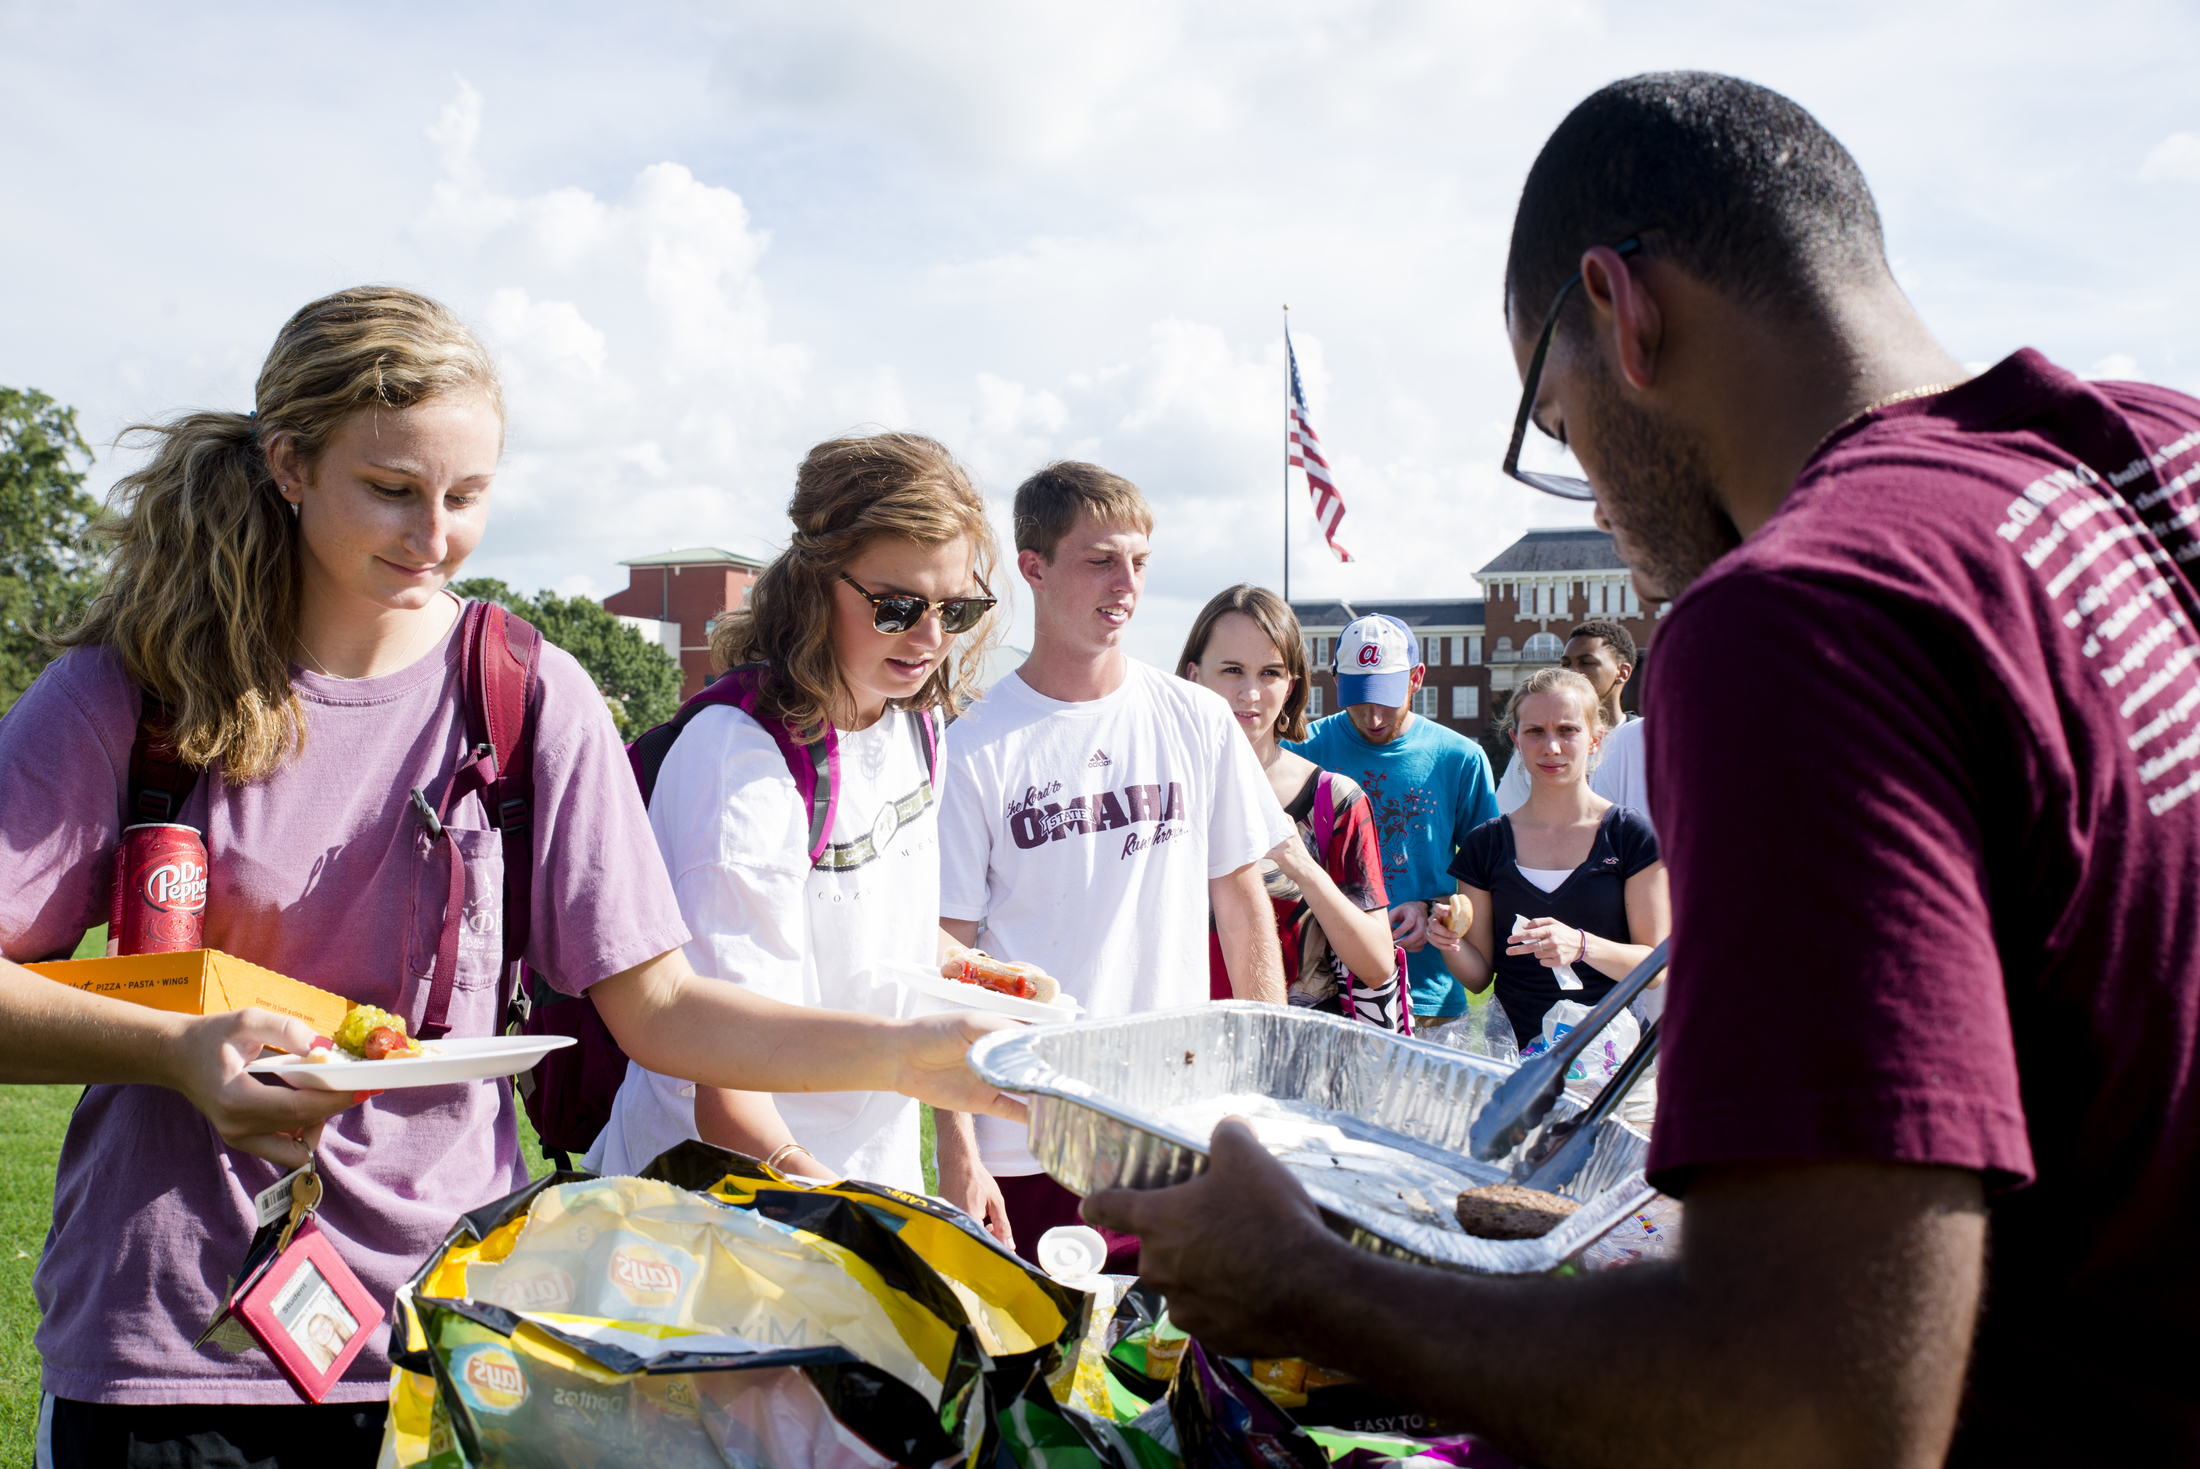 Free barbecue, pizza, smoothies, jambalaya, beignets and coffee and other goodies will be provided to incoming freshmen and transfer students next month during MSU's annual "Dawg Daze" welcome events.